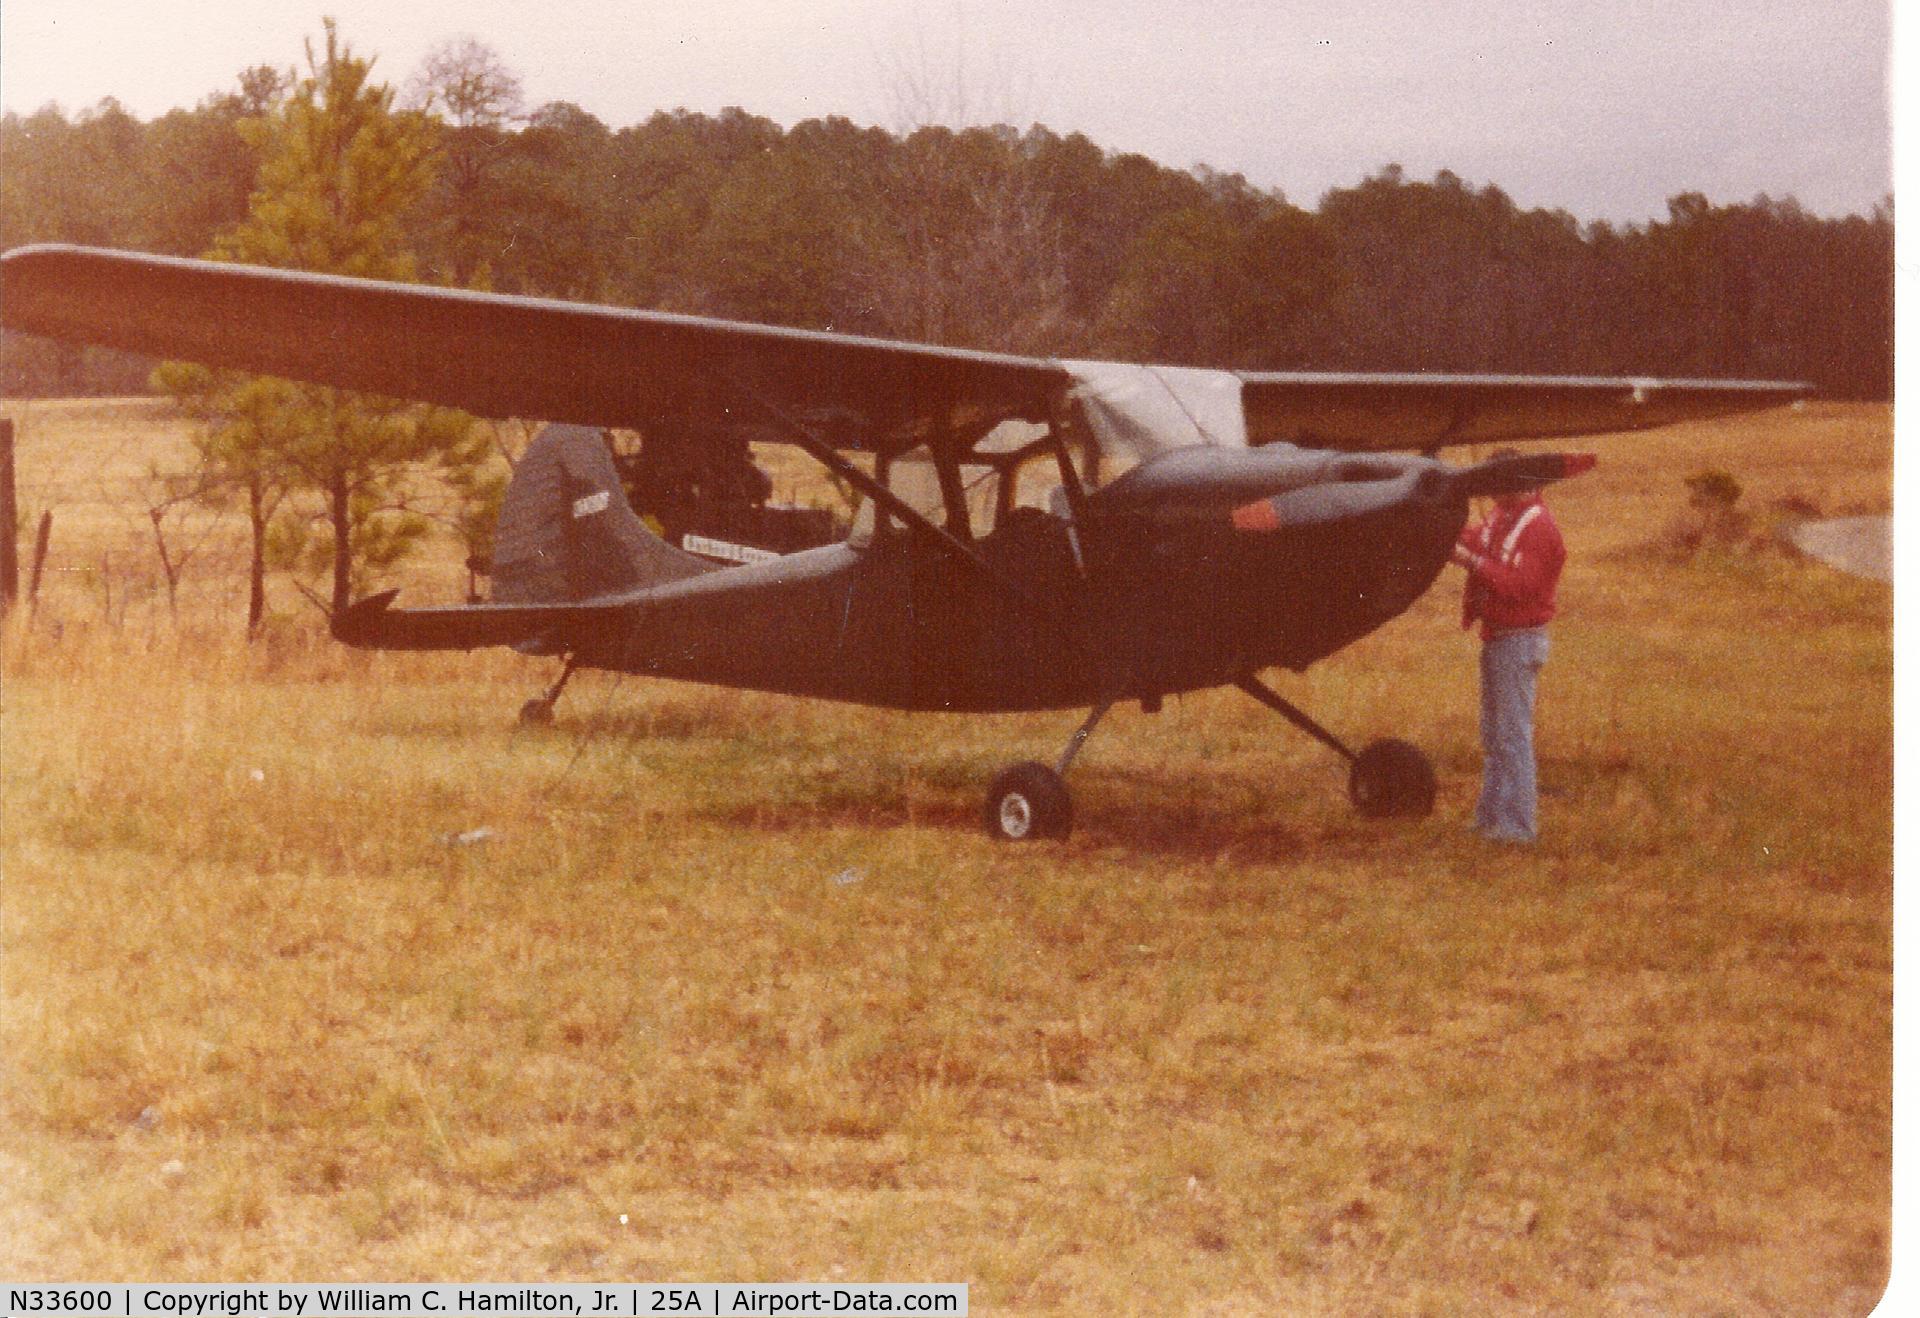 N33600, 1951 Cessna O-1A (305A) Bird Dog C/N 22303, Photo is circa 1979.  N33600 was operated by the Fort McClellan Flying Club based at McMinn Airport (25A) in Weaver, AL.  Gent in the picture was a flight instructor at the airport.  He is now a very senior Captain for FedEx.  Airport is now closed.